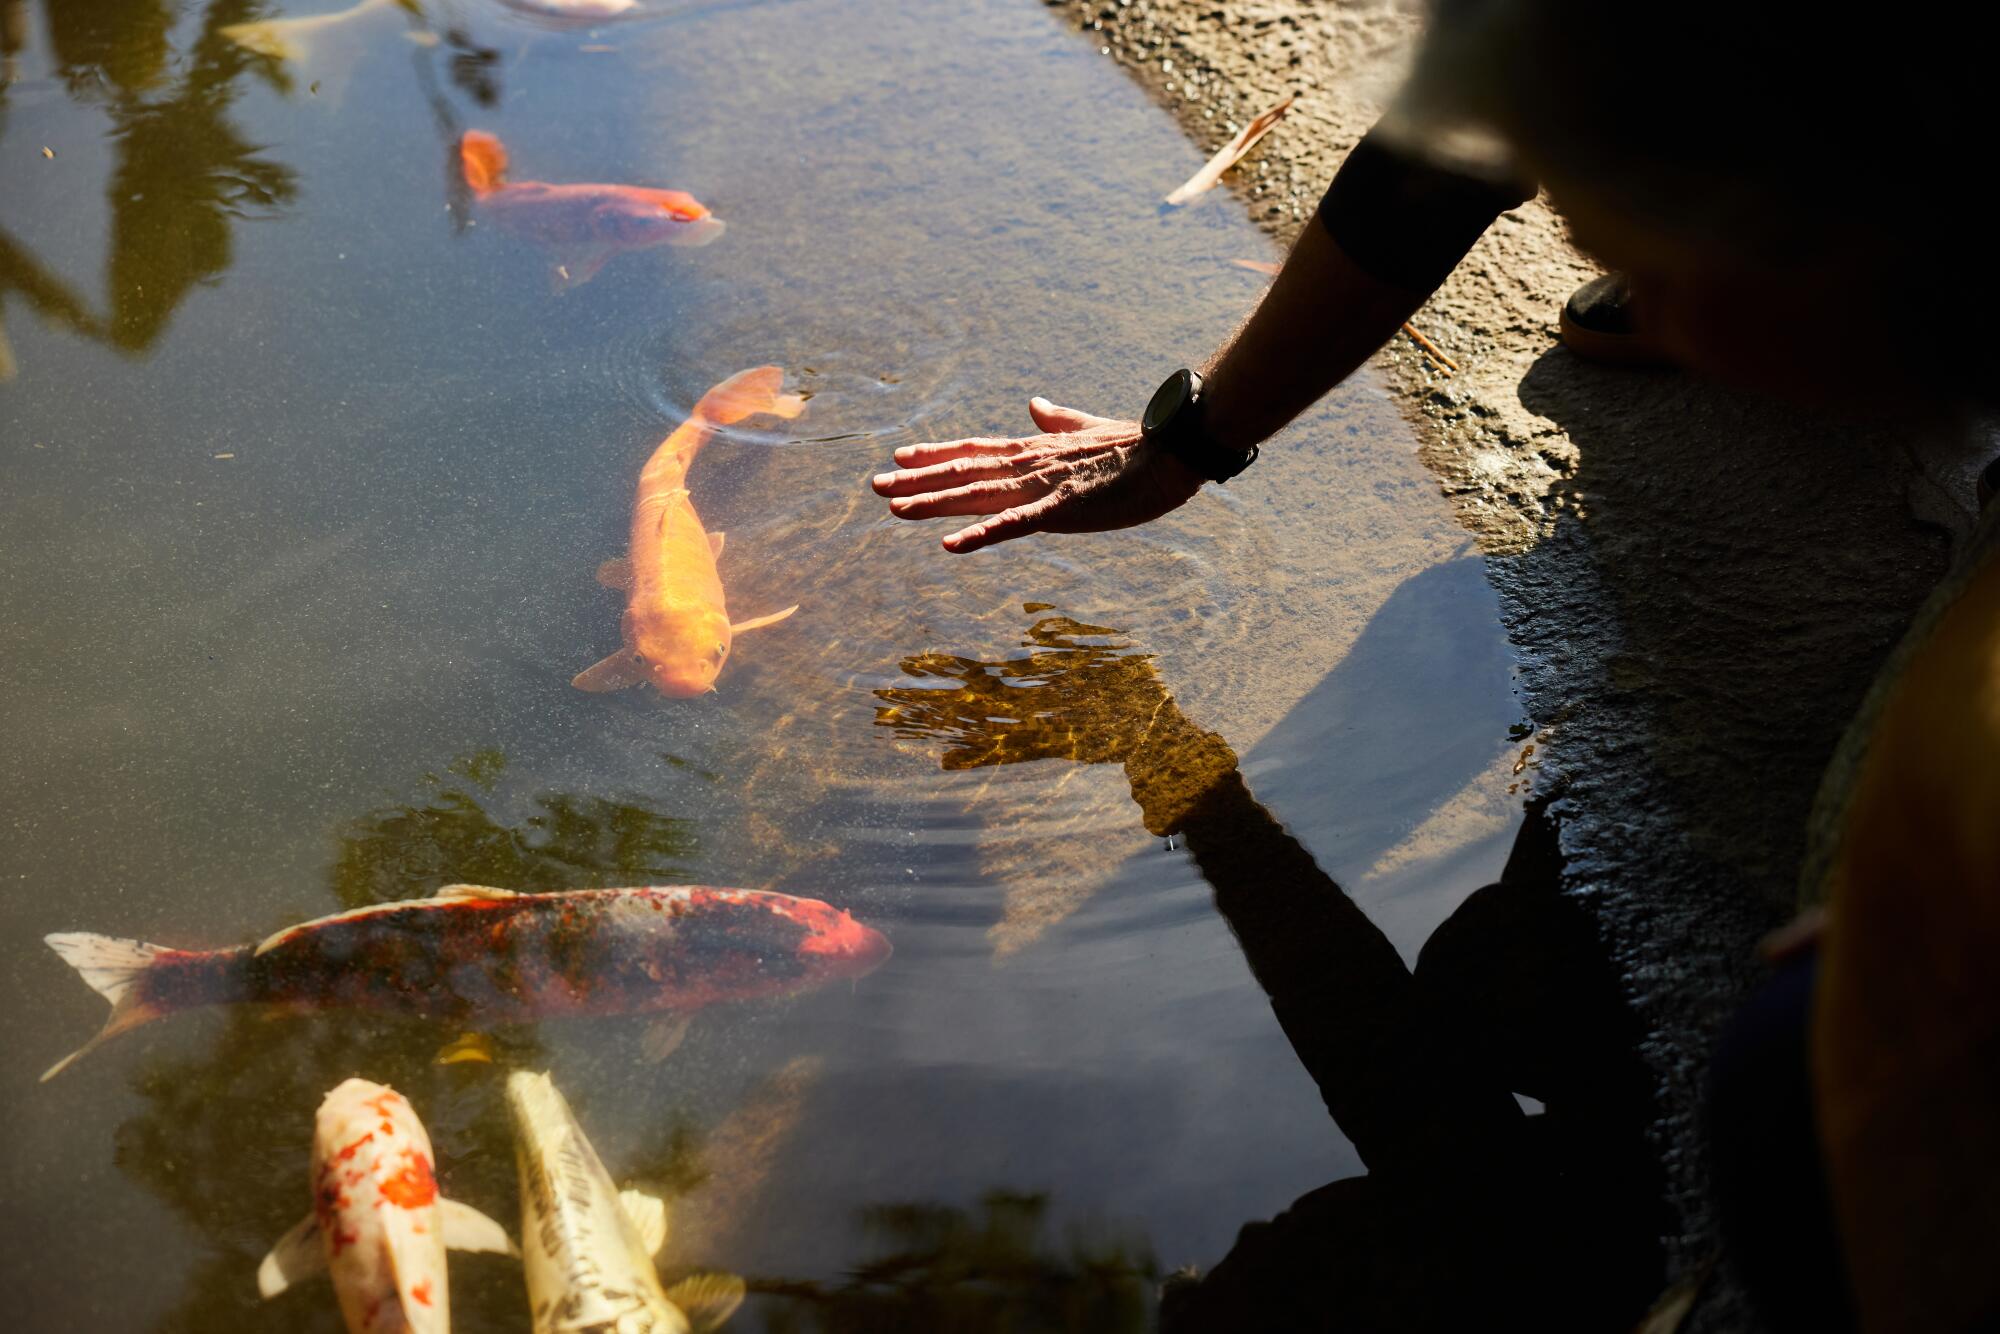 A woman's hand reflects on the surface of a pond, filled with koi fish, at the Huntington.